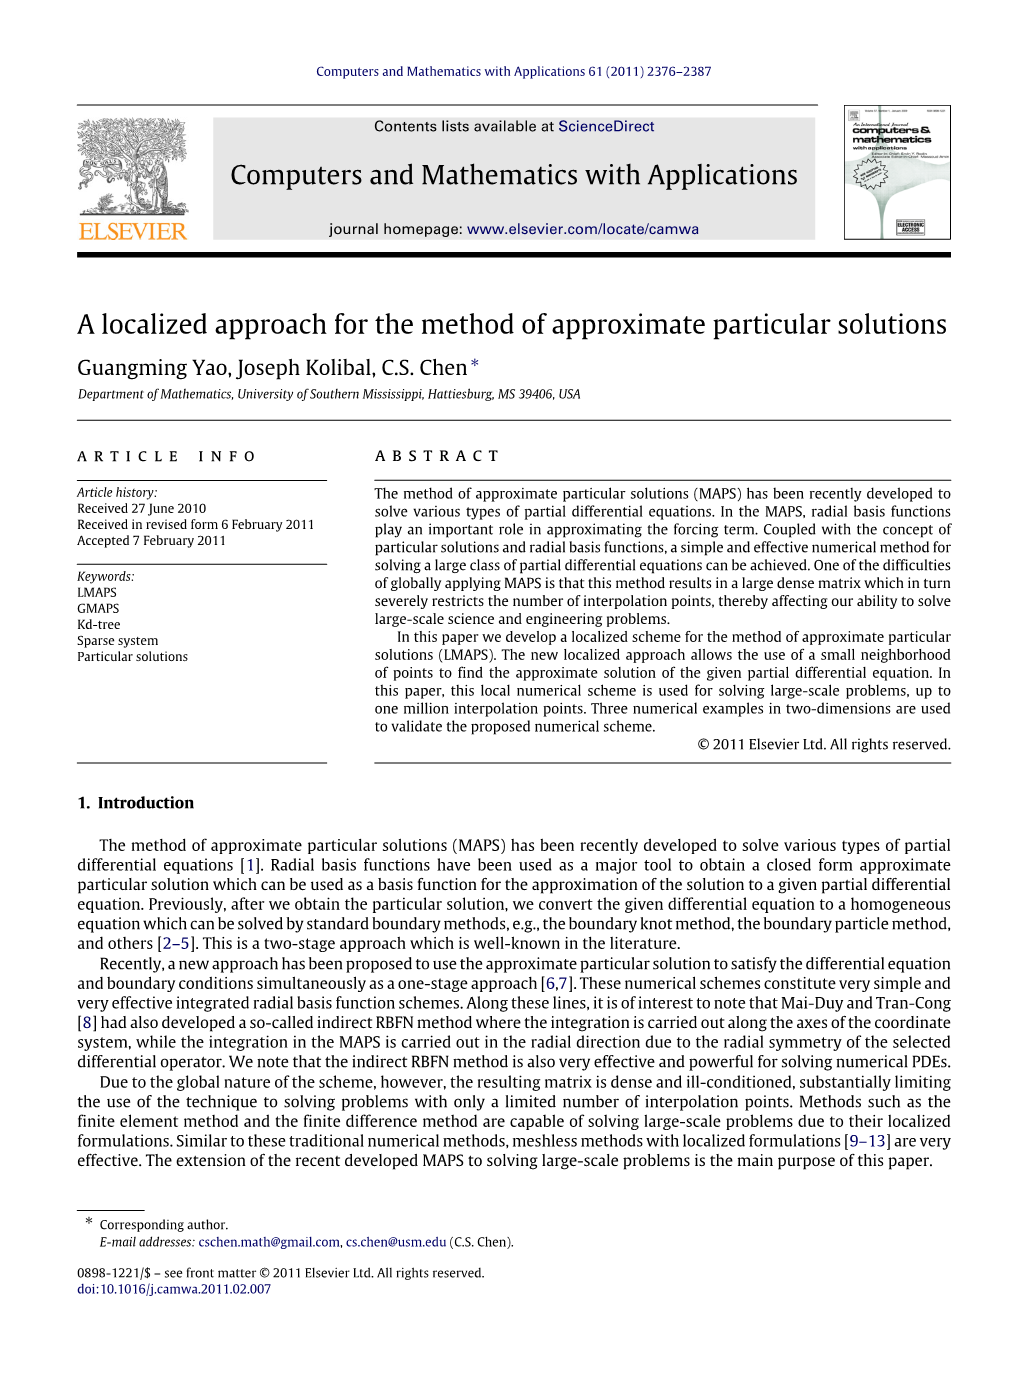 A Localized Approach for the Method of Approximate Particular Solutions Guangming Yao, Joseph Kolibal, C.S